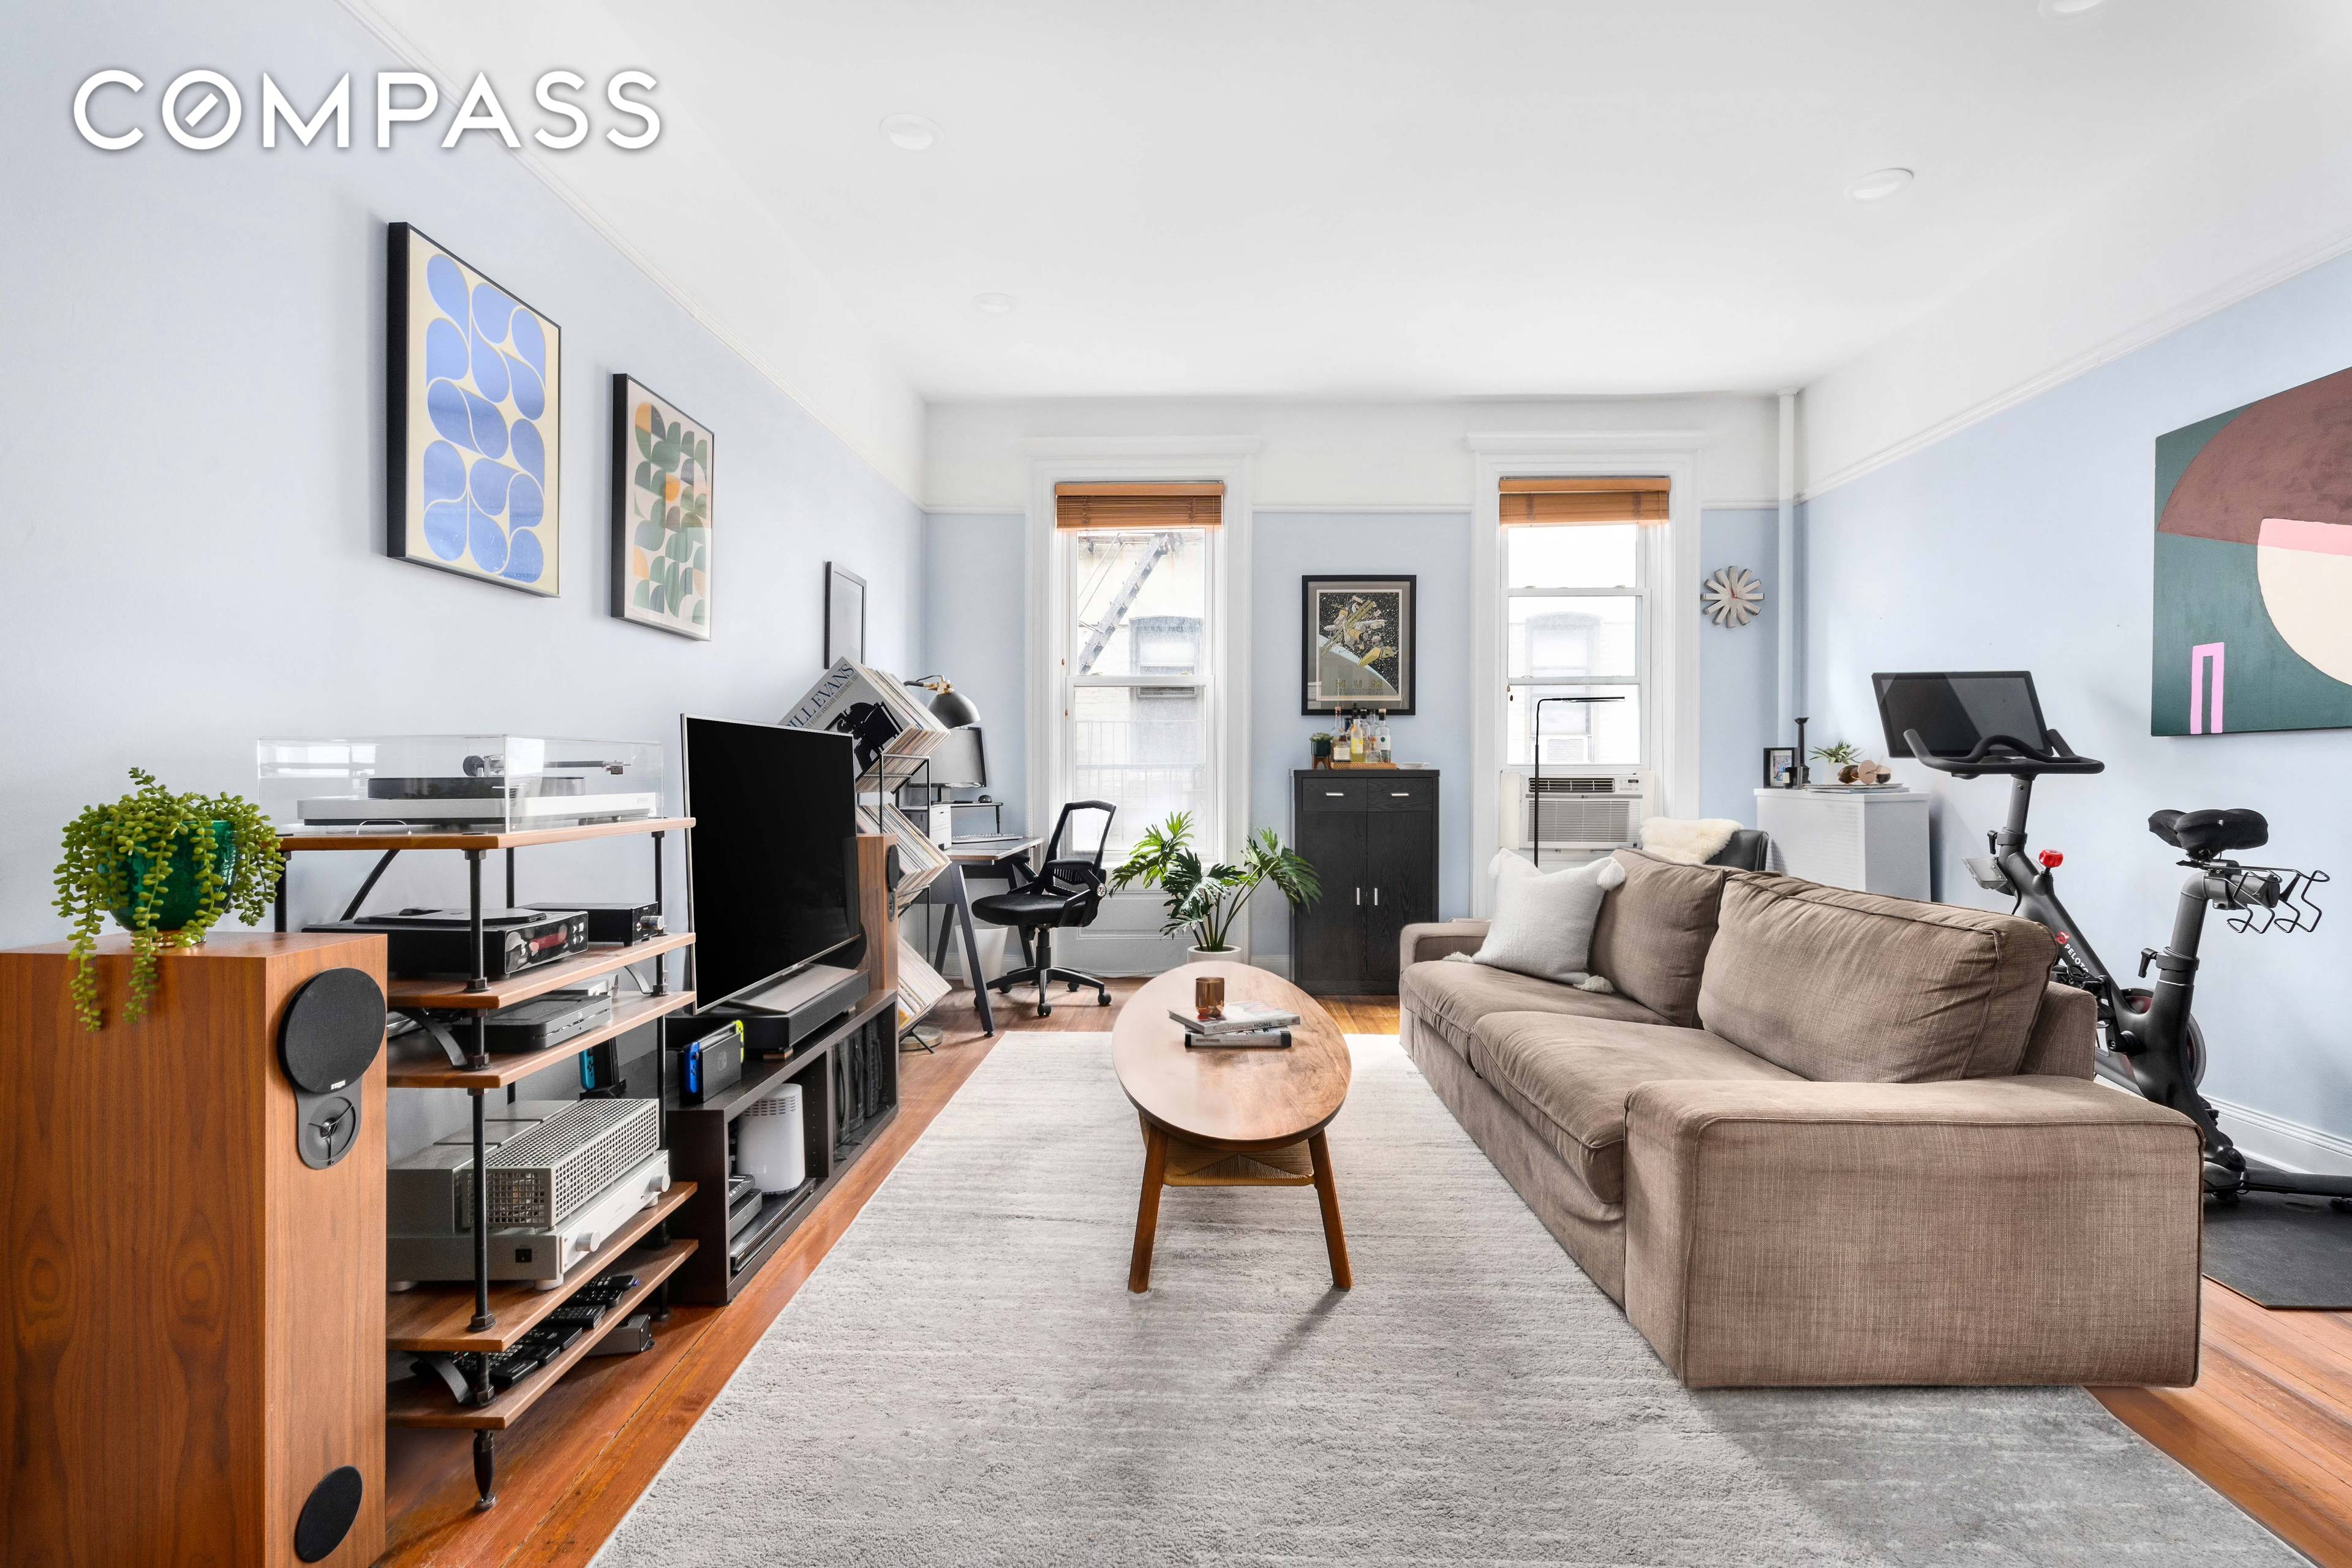 Situated on one of Park Slope s most idyllic blocks with extra wide sidewalks and lush trees, this charming one bedroom home is filled with lovely pre war details including ...